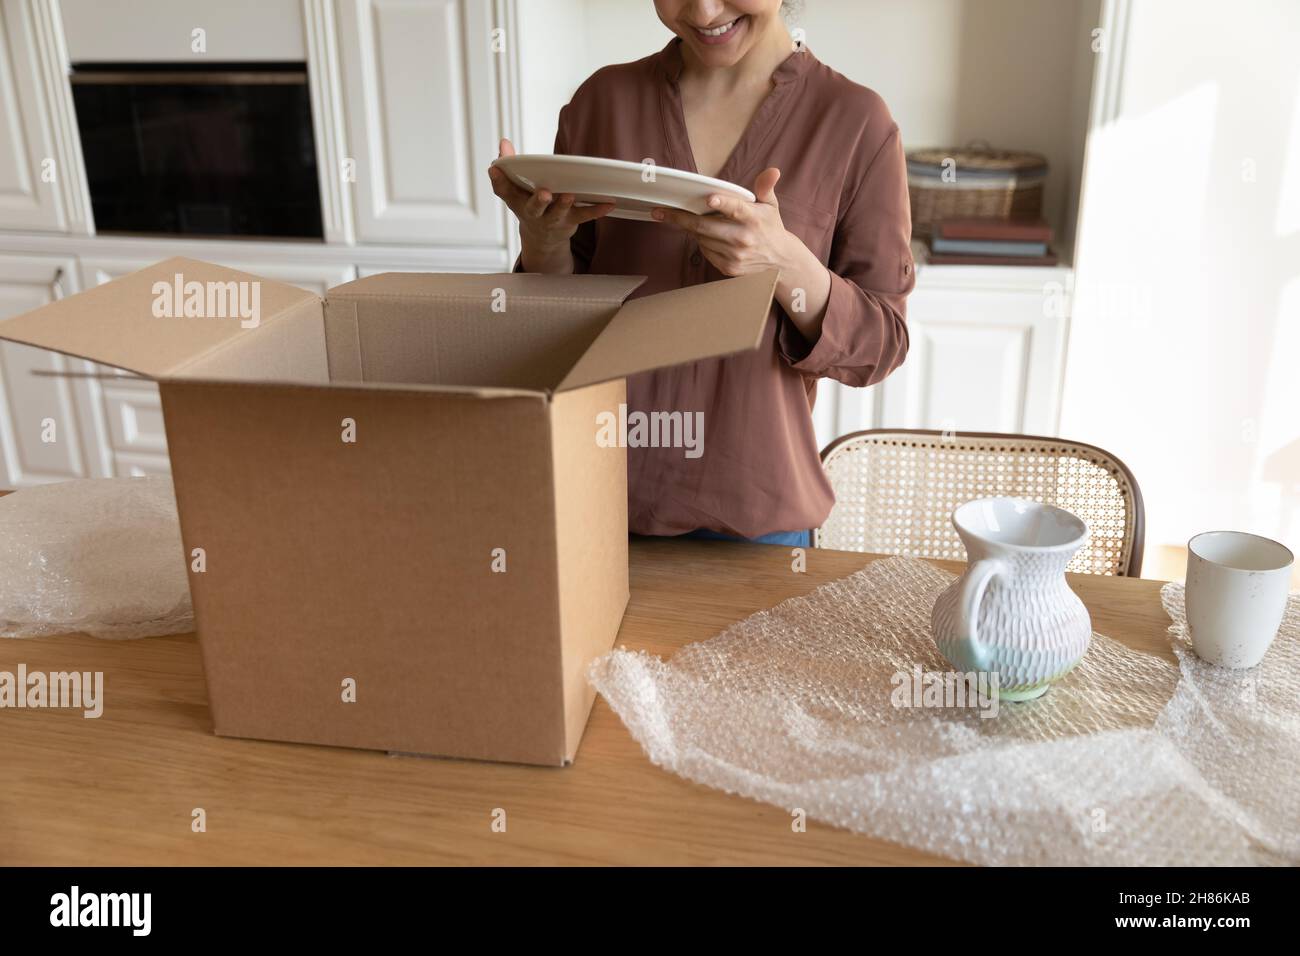 Smiling young indian woman unpacking ware from carton box. Stock Photo